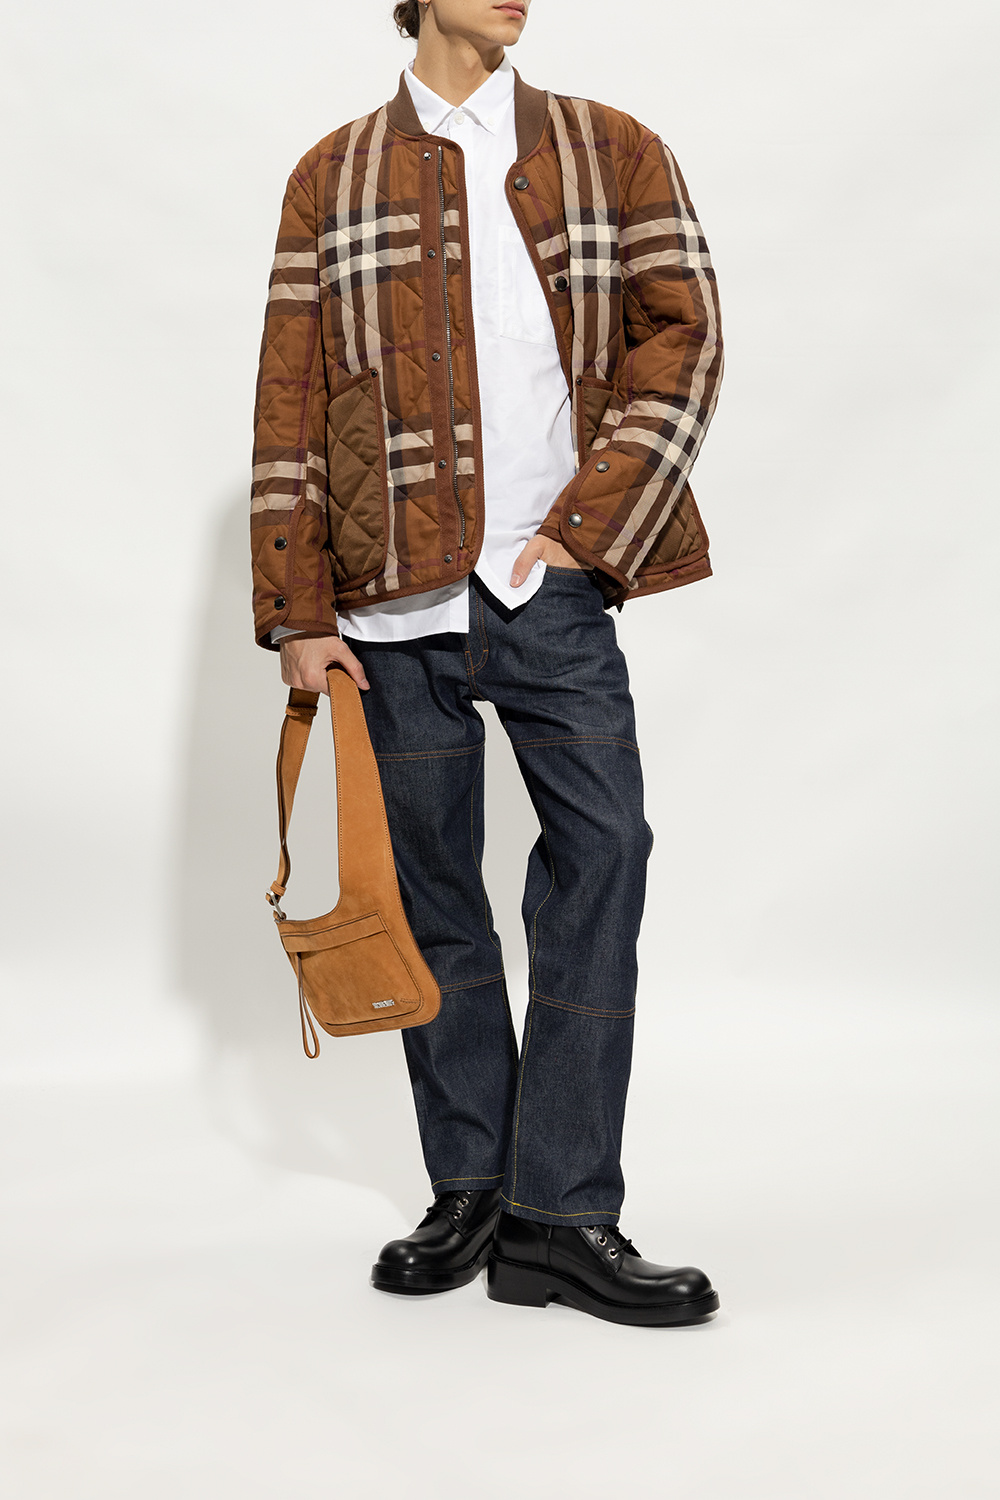 Burberry White knit wool BURBERRY cardigan